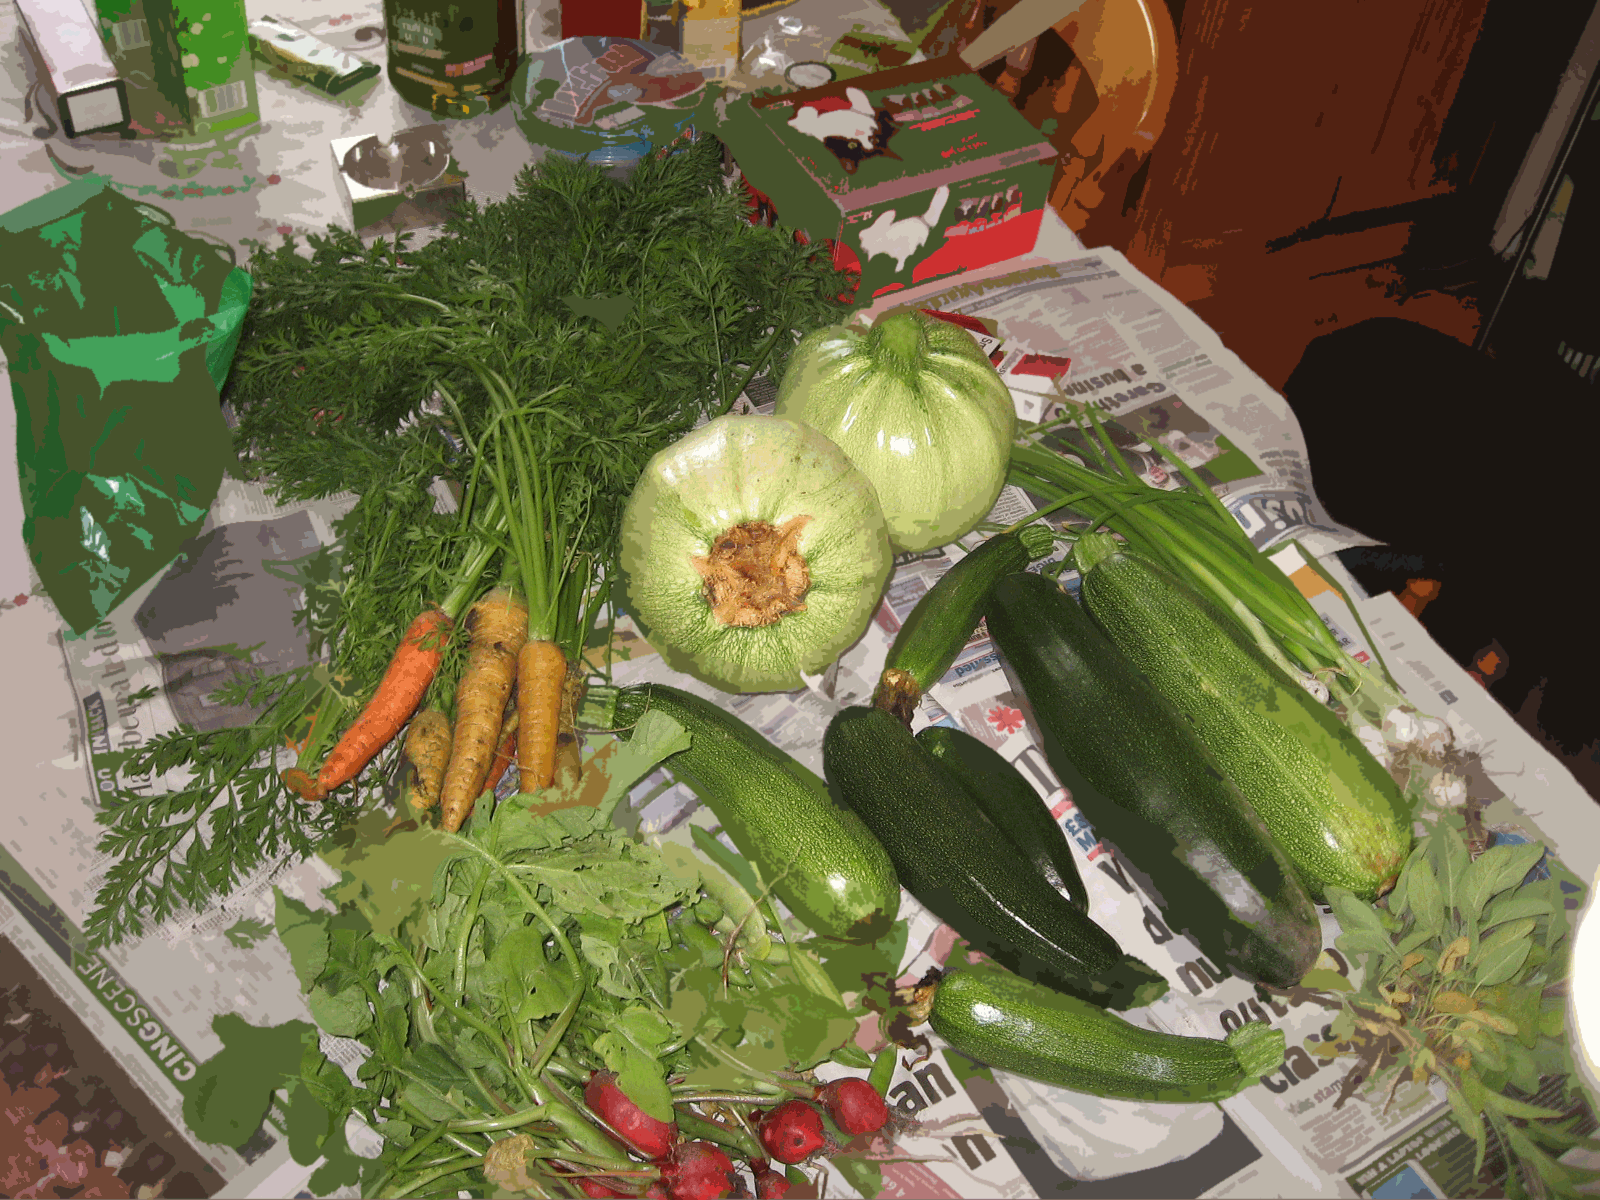 Thrifty times series: Home grown food